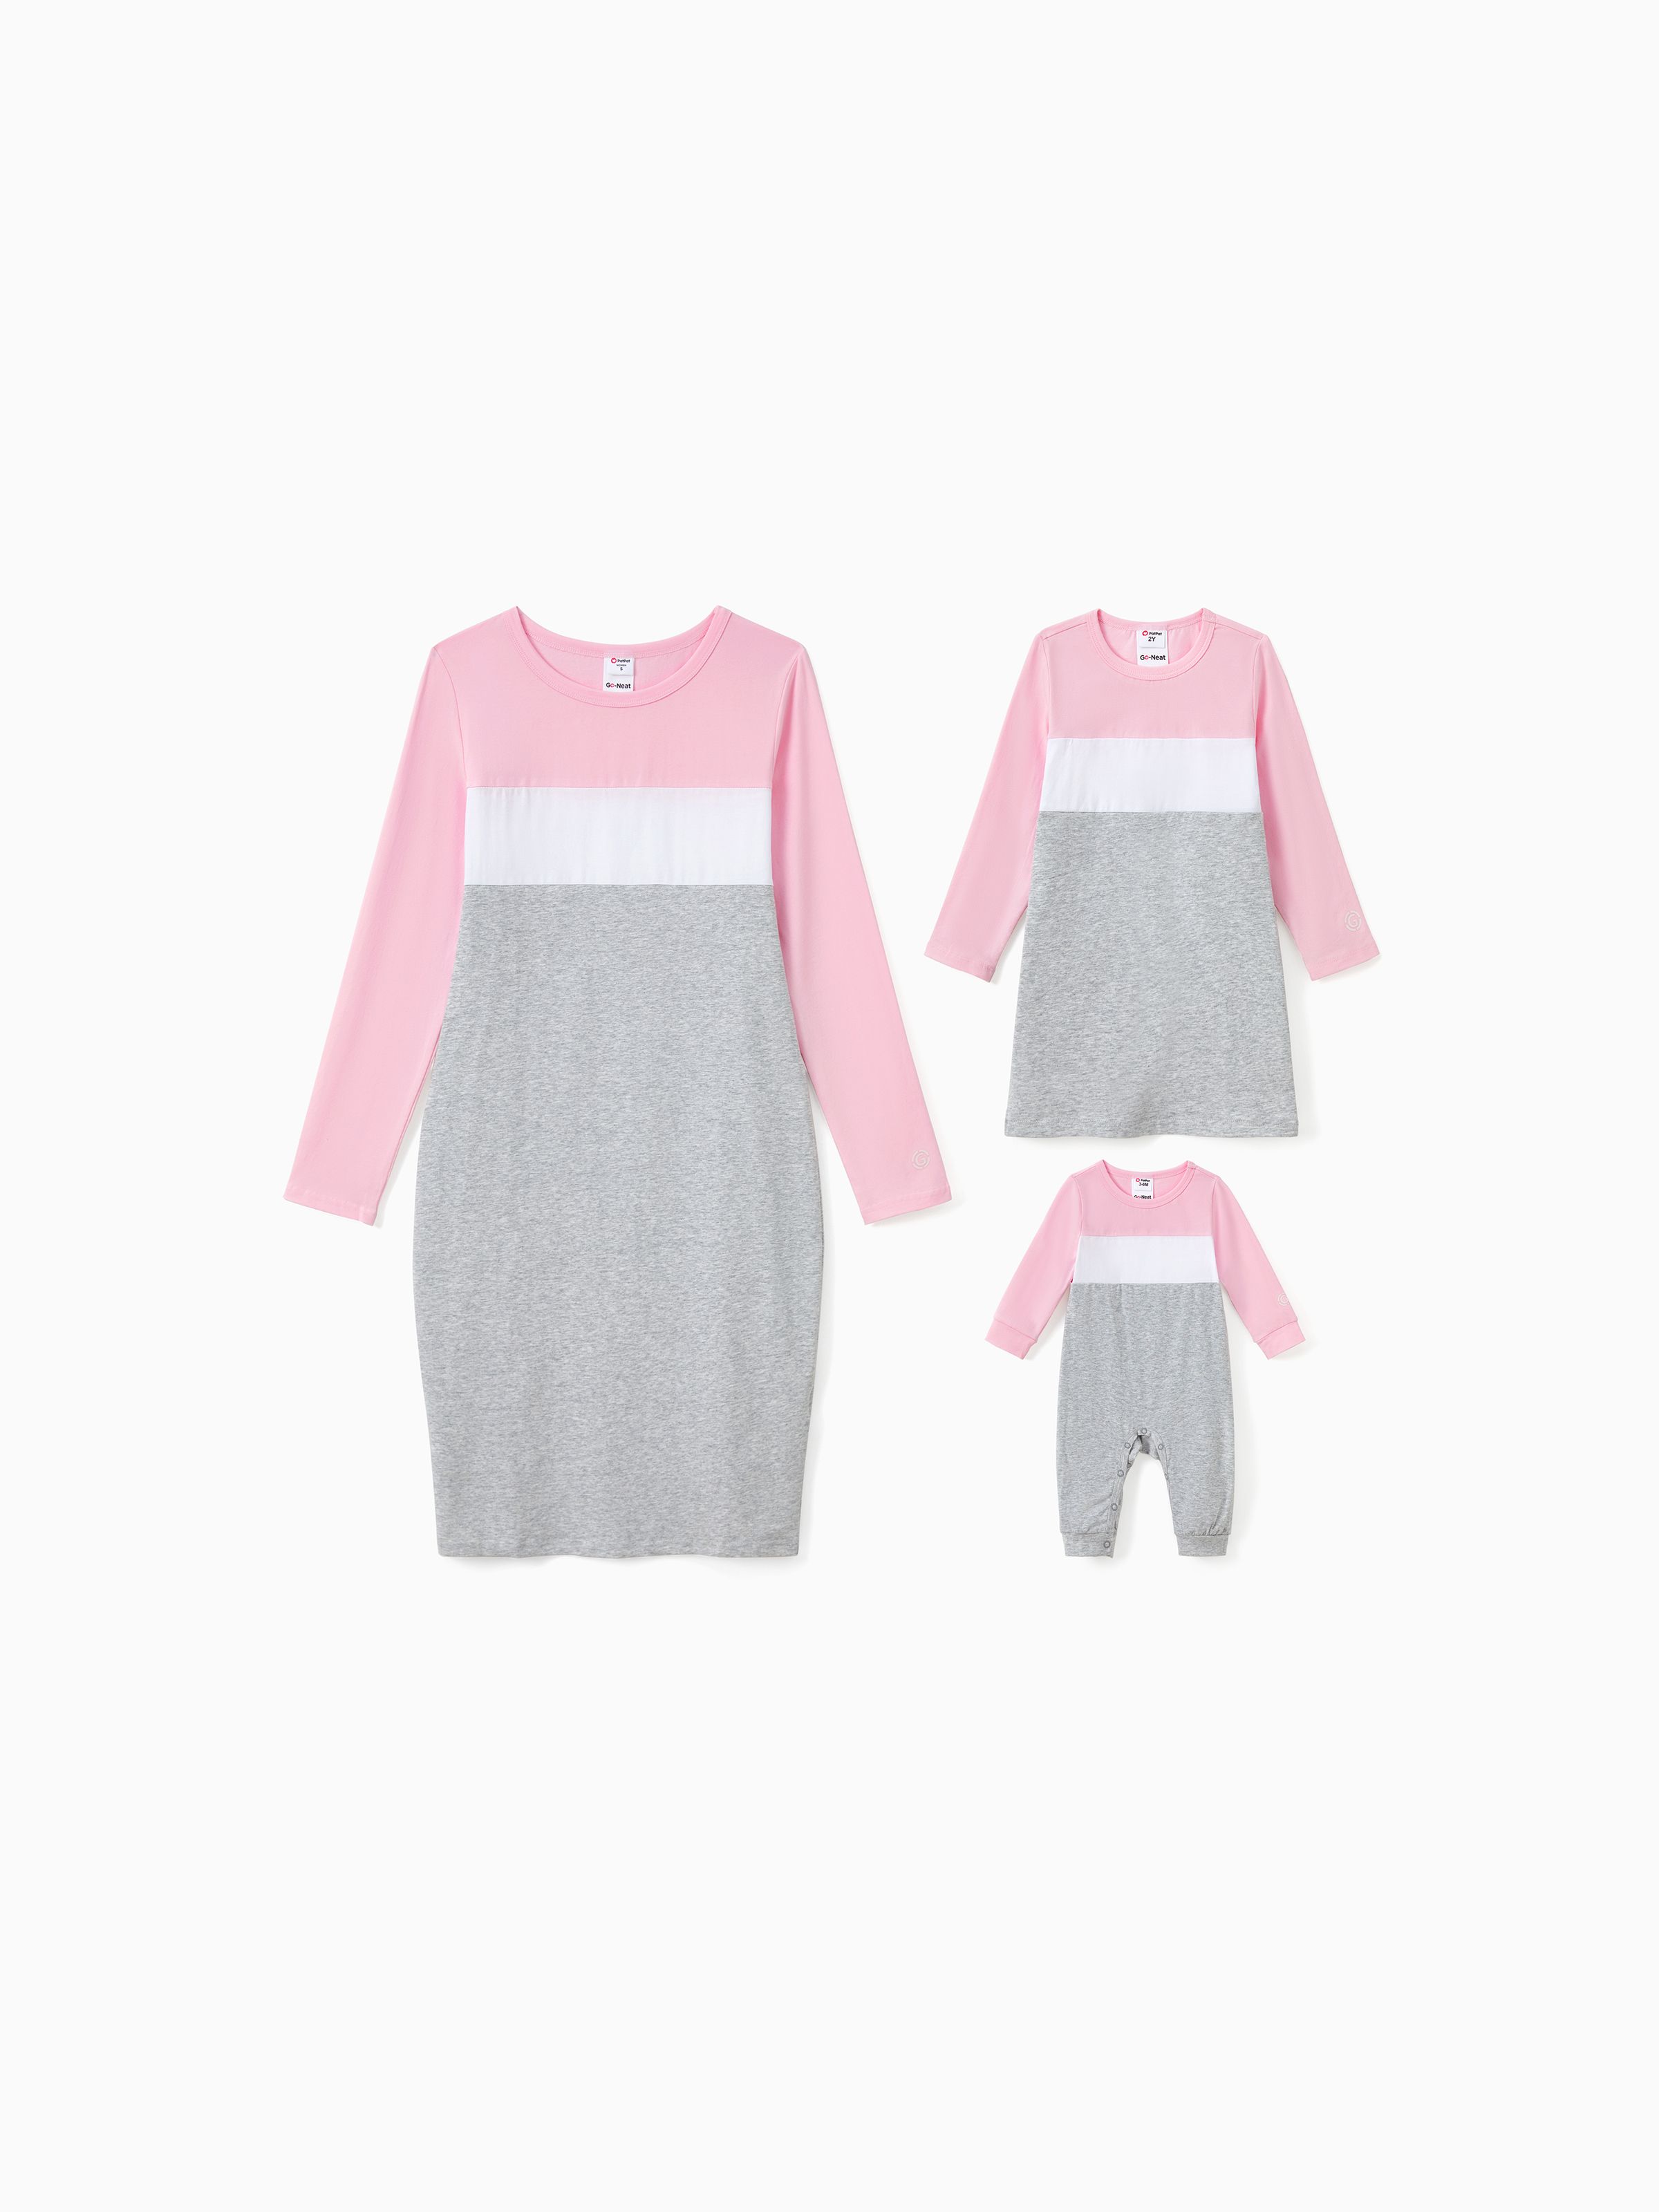 

Go-Neat Family Matching Colorblock Round Neck Dresses and Jumpsuit Sets